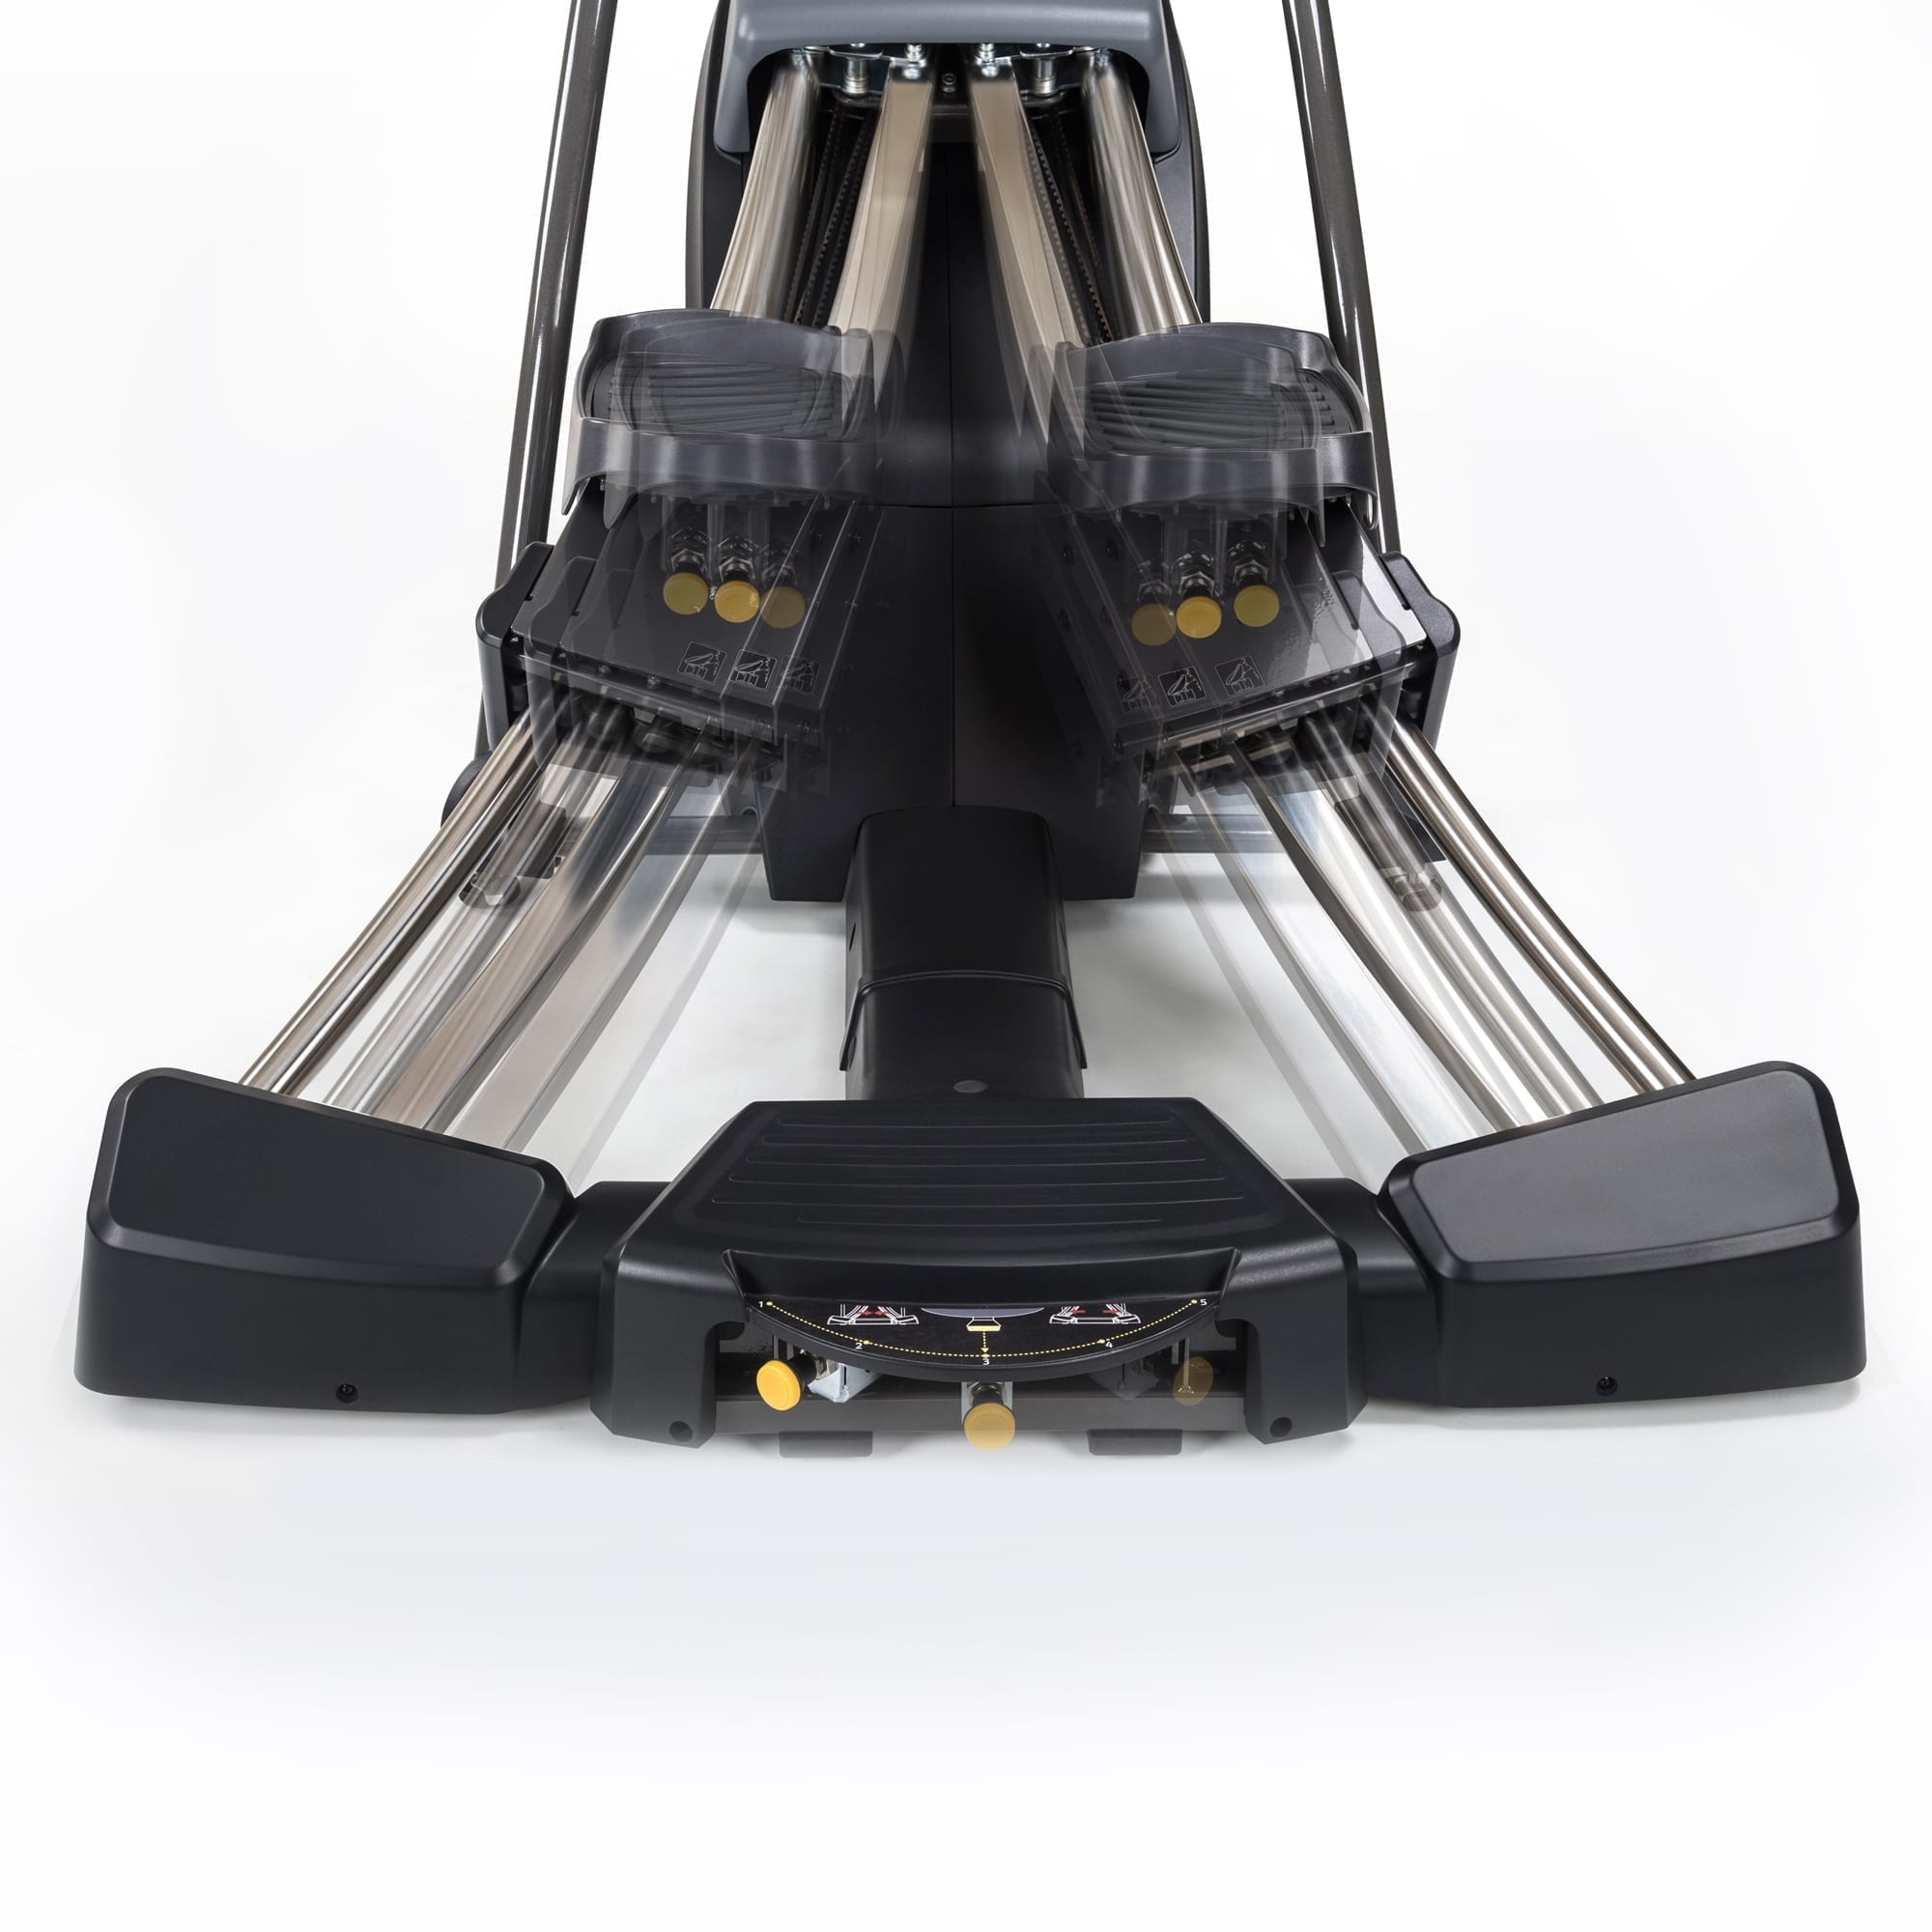 SportsArt Status Pinnacle Trainer S775 pedals in motion 